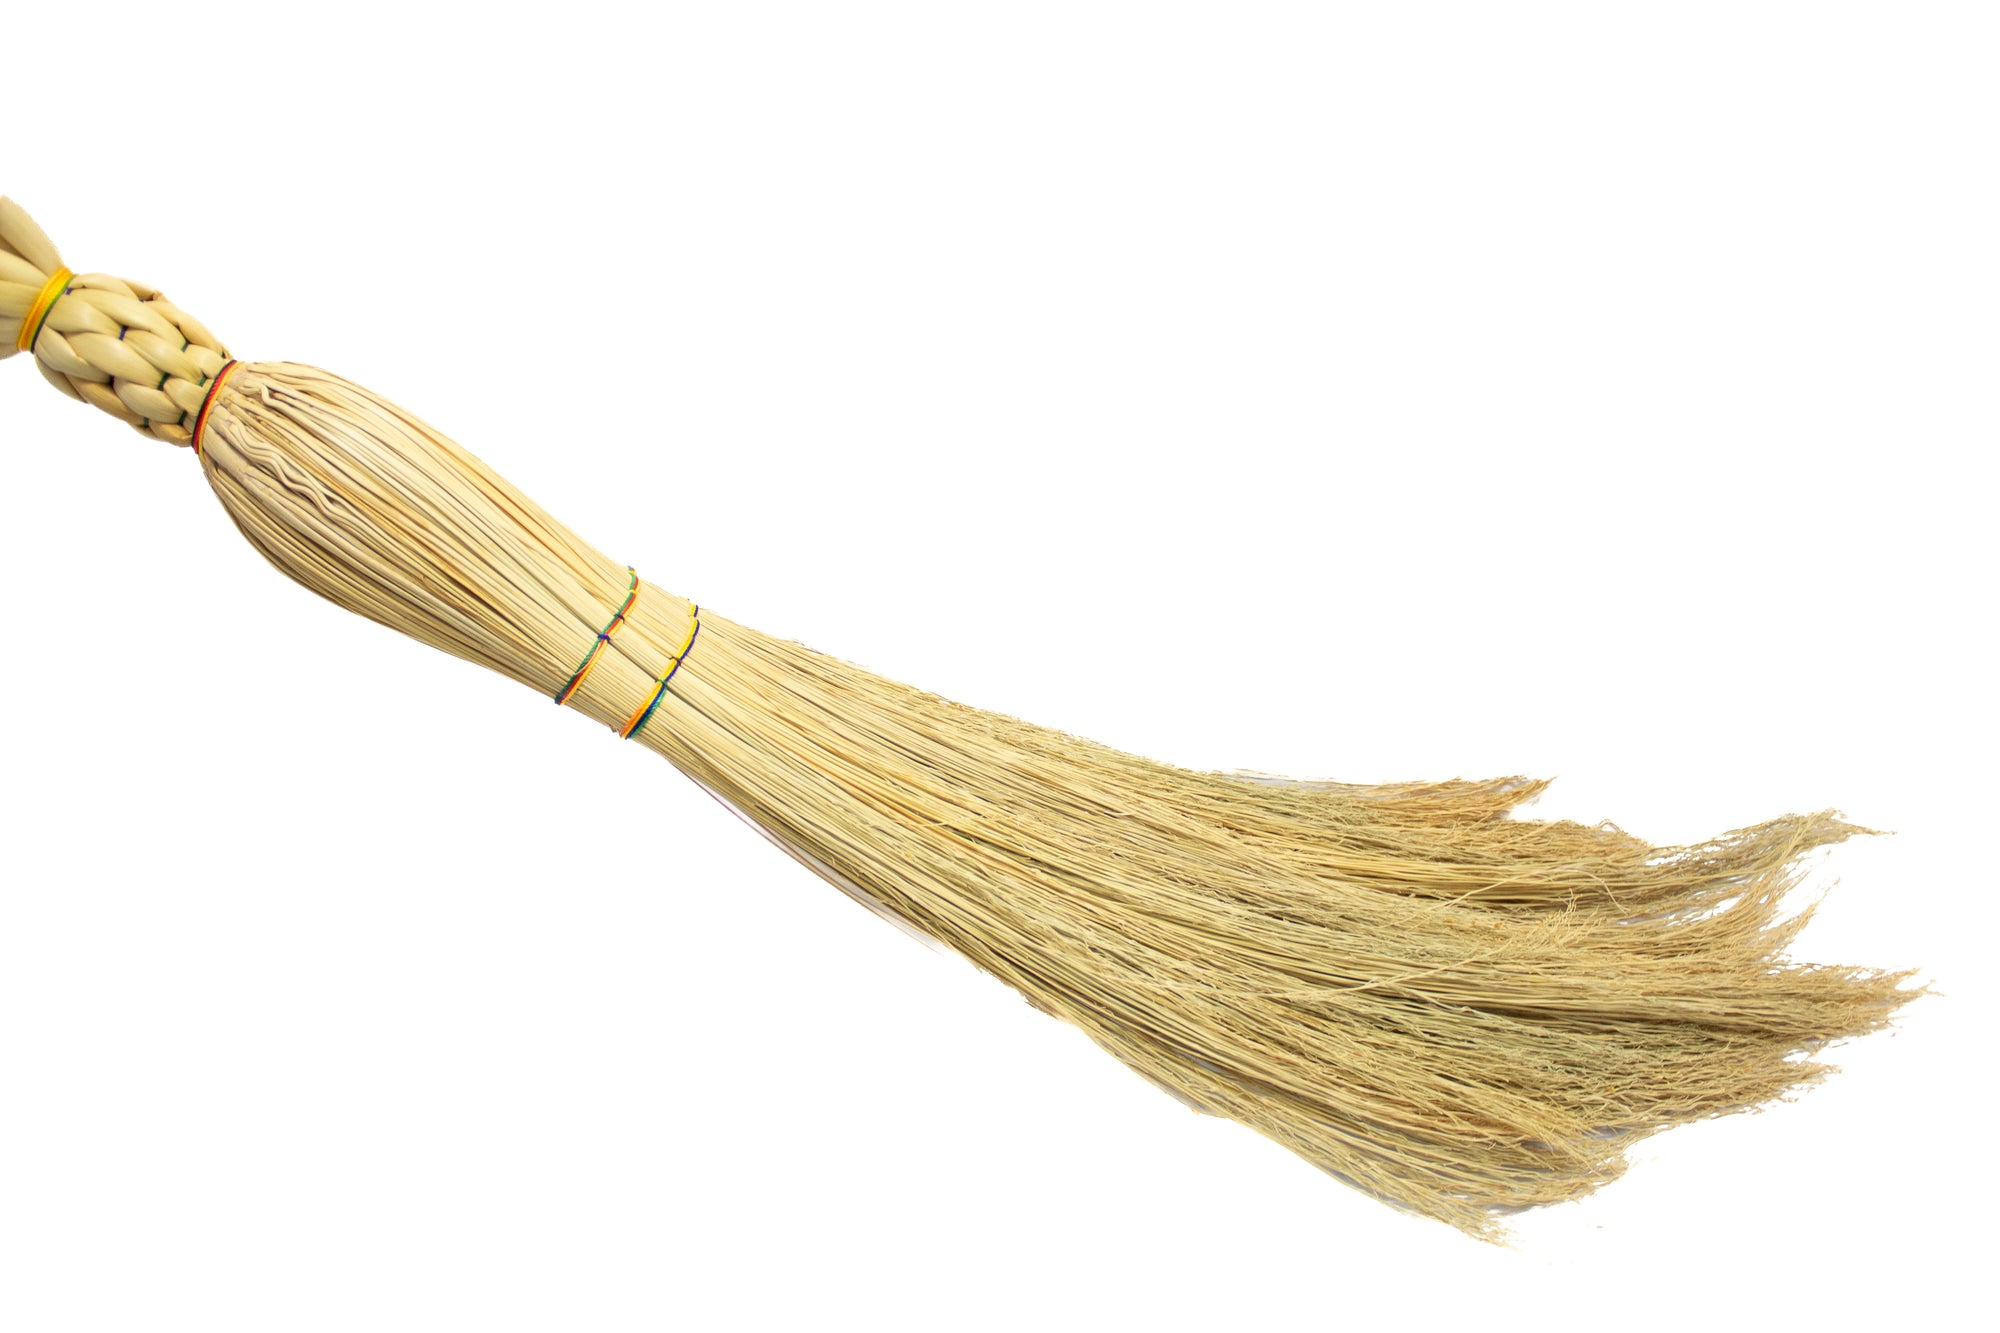 Rustic Kitchen Broom (Pick Up or In Person Purchase Only)